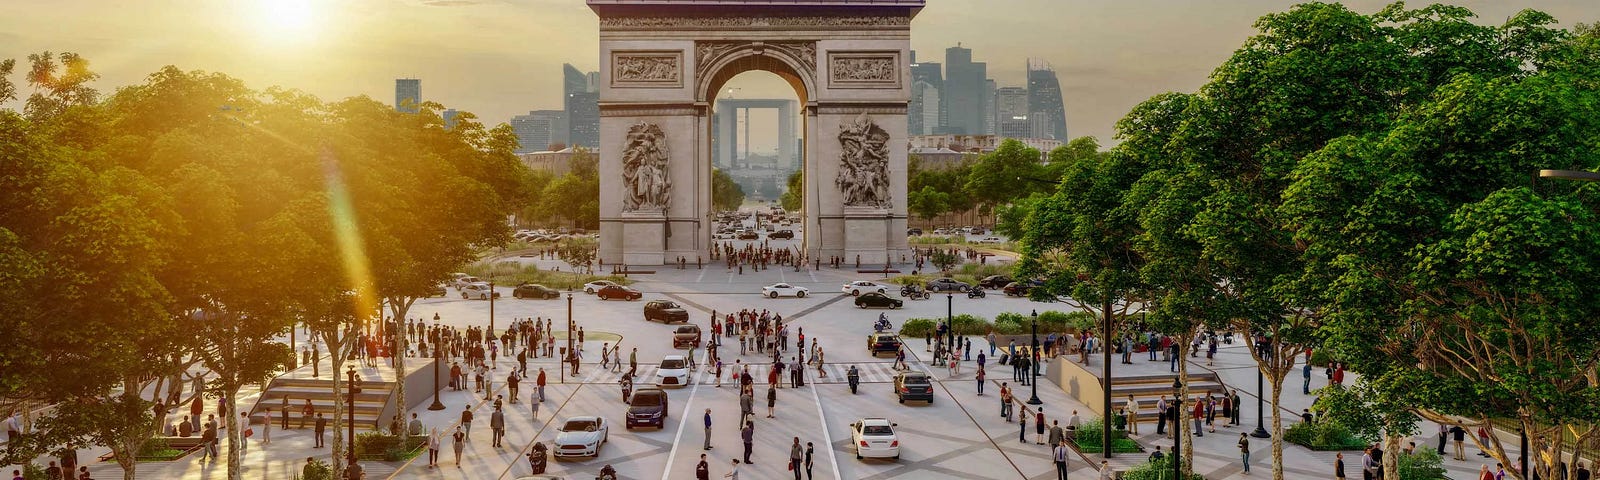 A rendered images of the Arc de Triomphe and the start of the Champs-Elysees, featuring a renovated road with grey-white pavement and criss-cross patterns